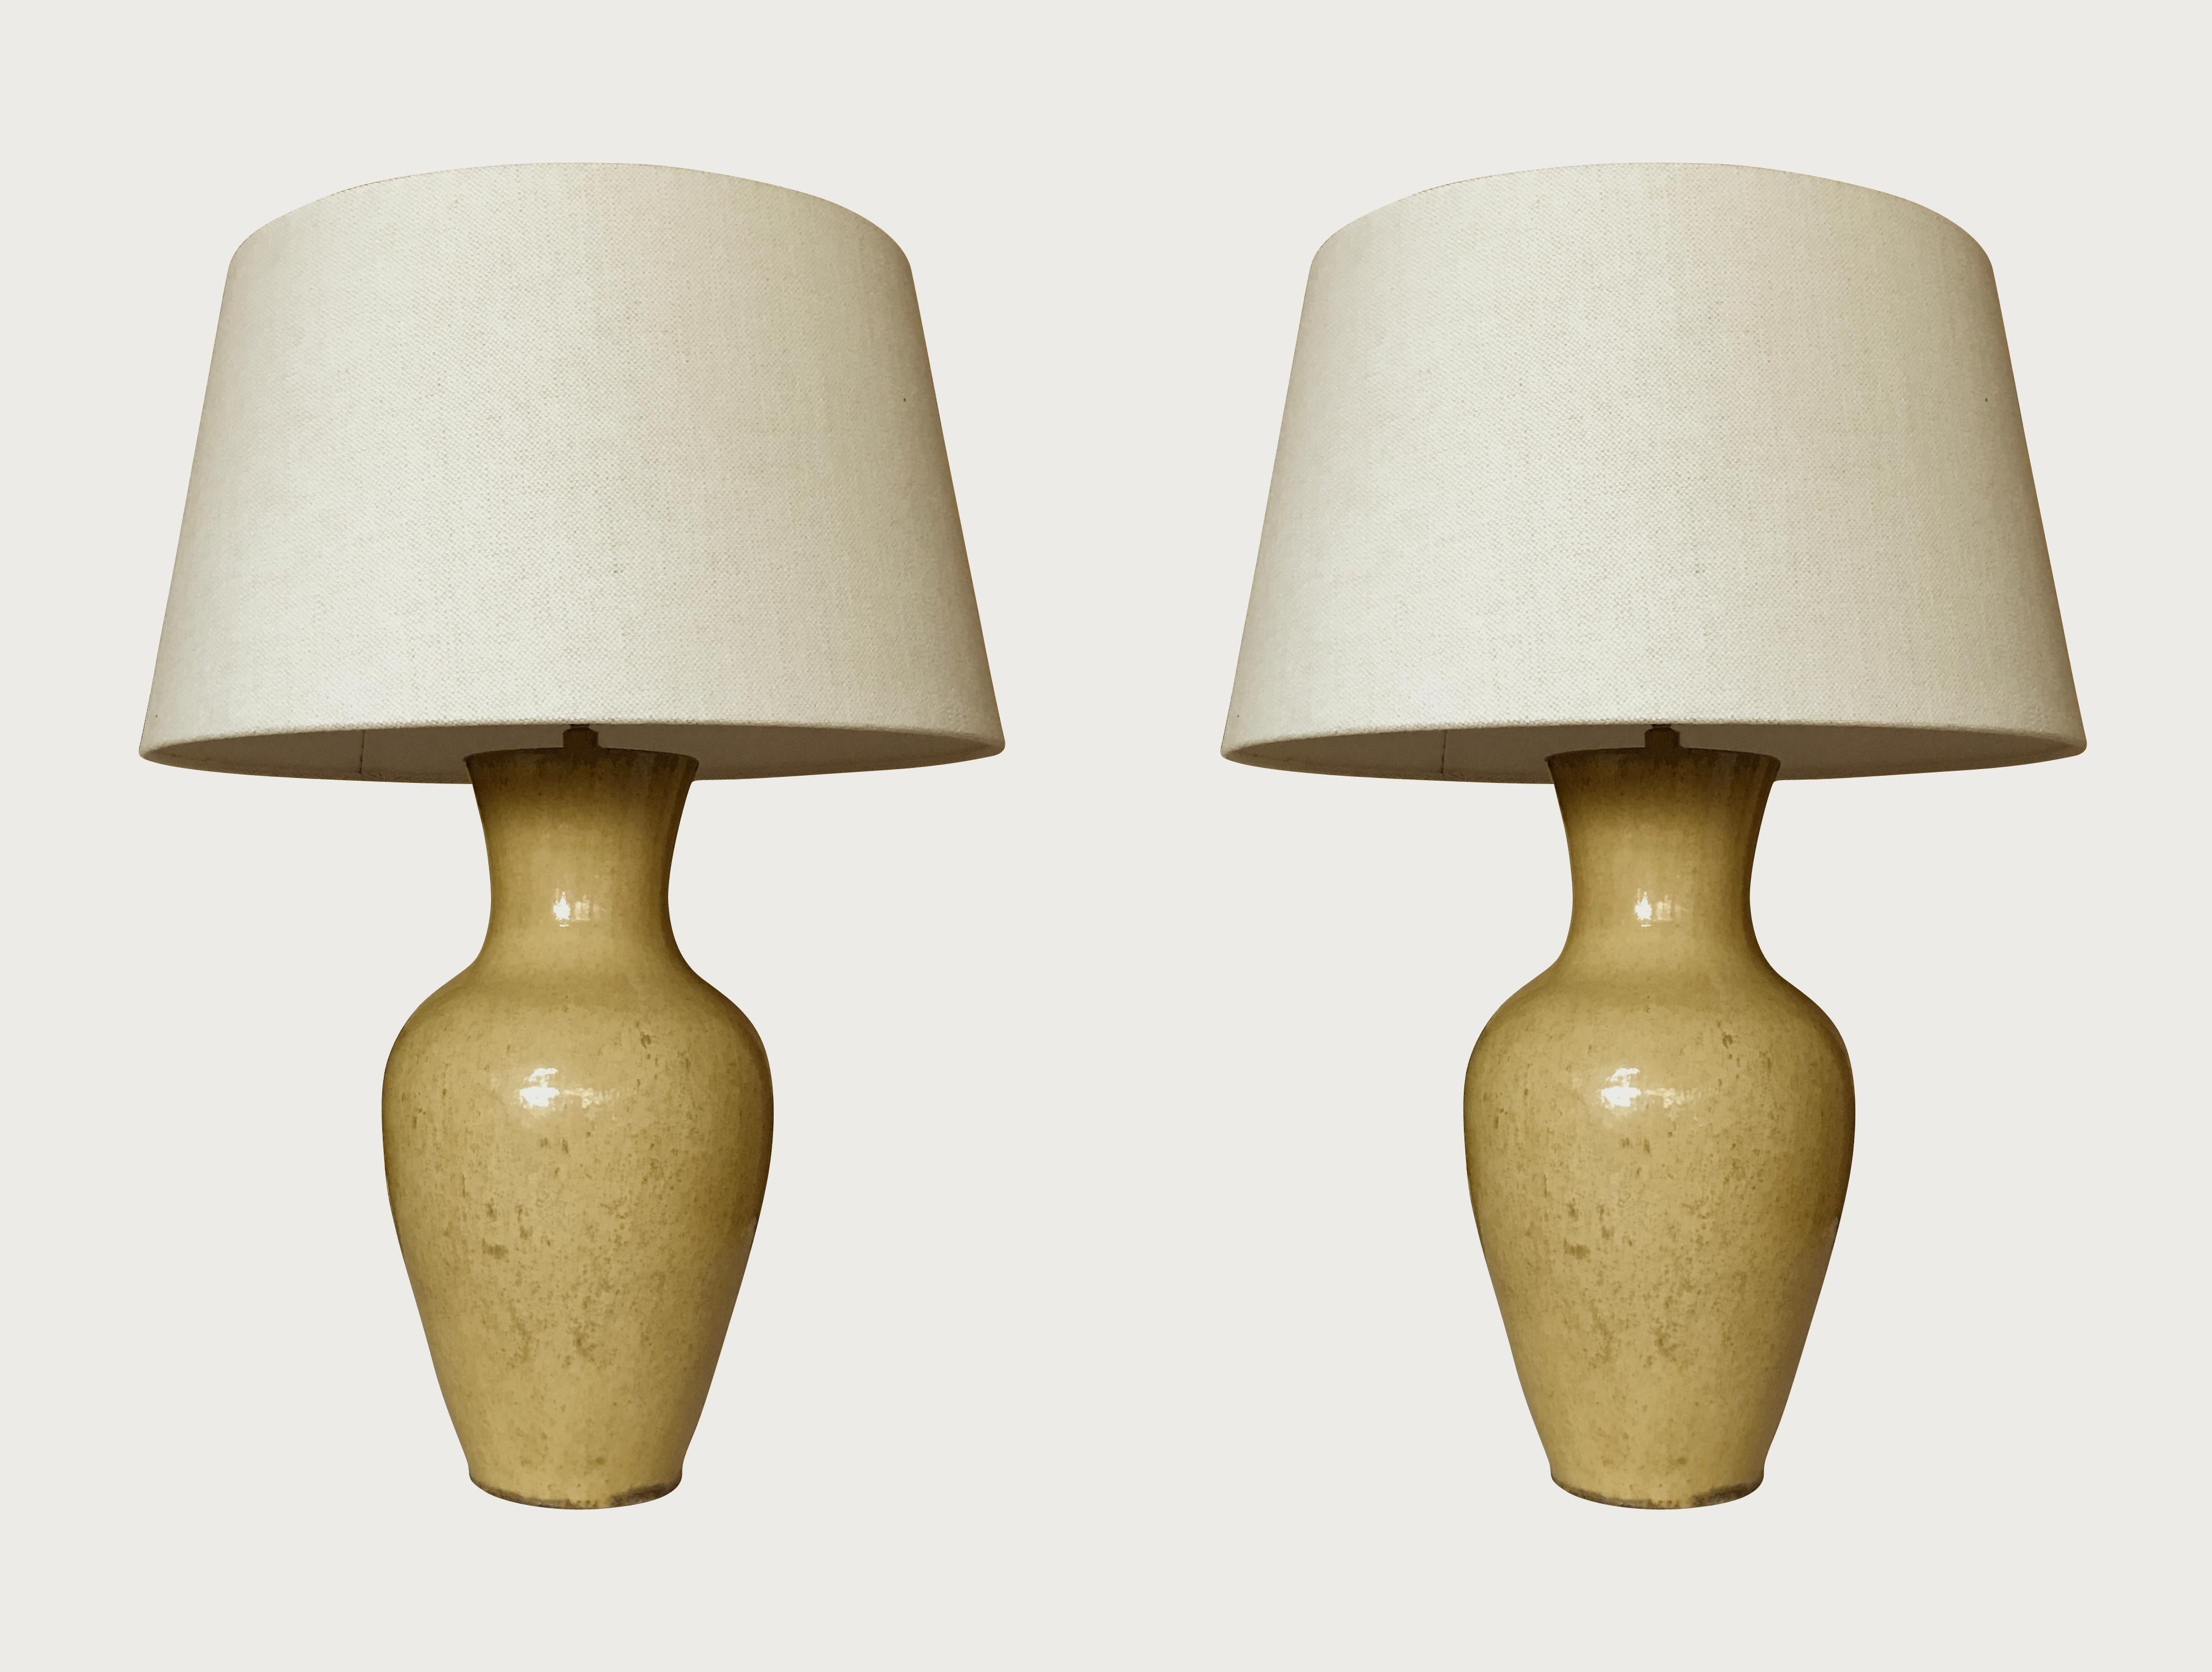 Contemporary classic shaped pair yellow terra cotta lamps with light brown speckles.
New Belgian linen shade.
Overall height including shade 22.5